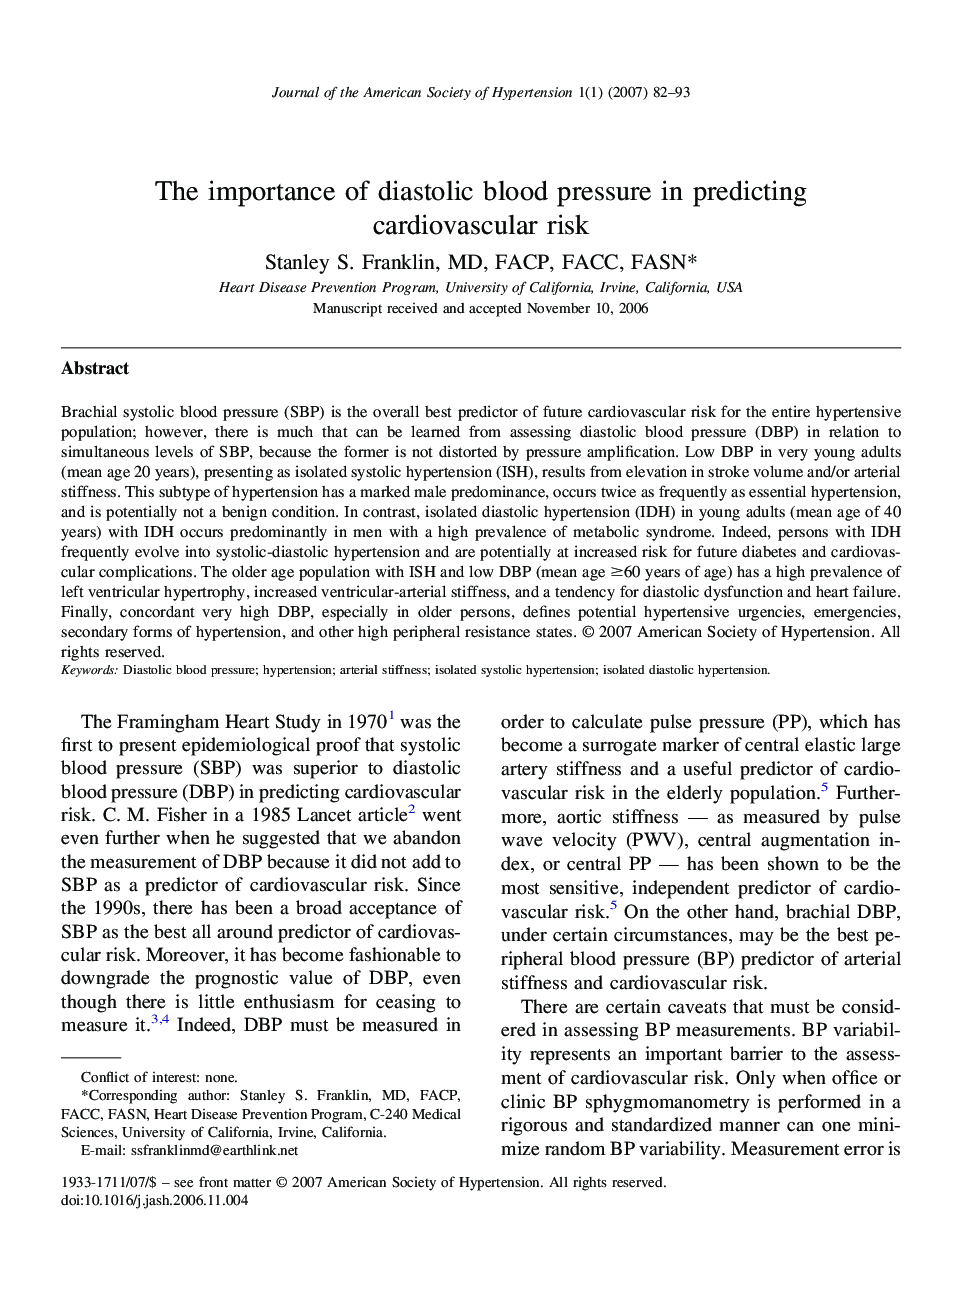 The importance of diastolic blood pressure in predicting cardiovascular risk 